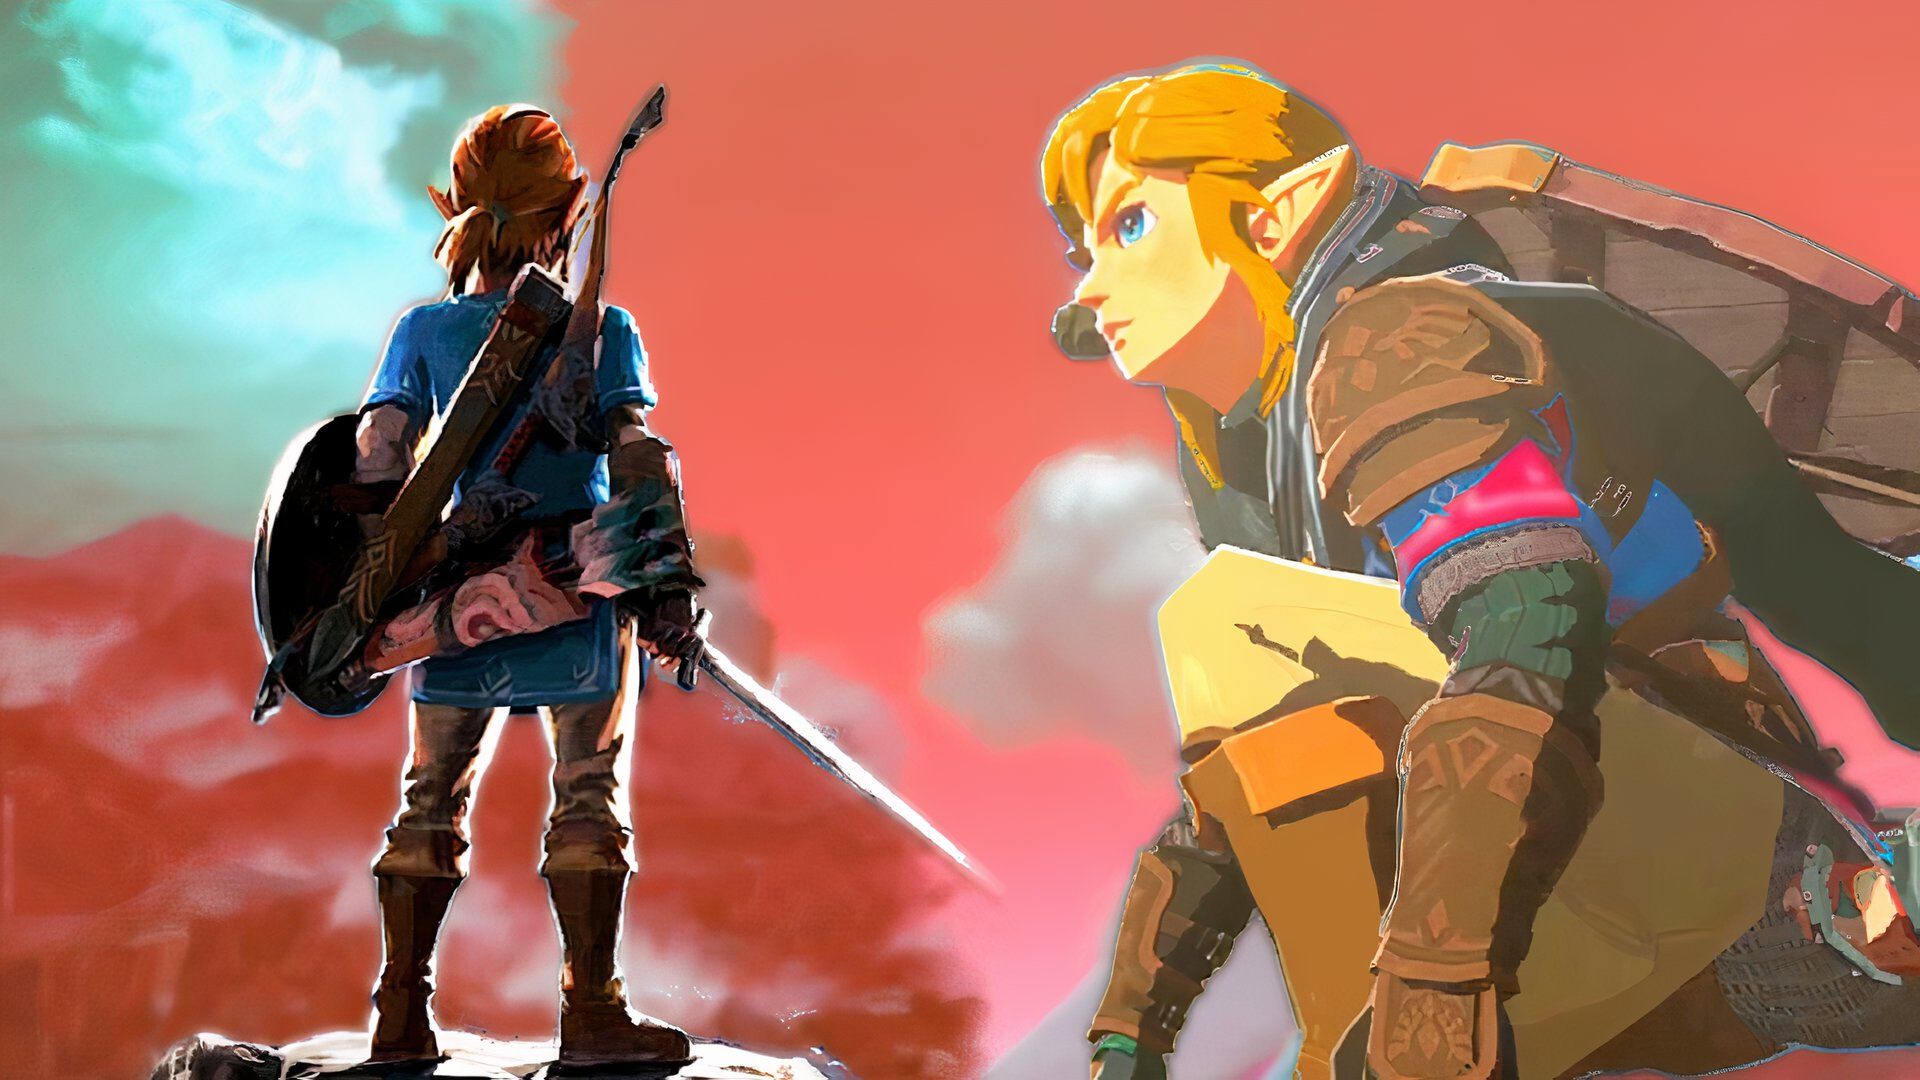 The Legend of Zelda Director Shares Challenge of Adapting Nintendo Franchise Due to ‘the Expectation Game’